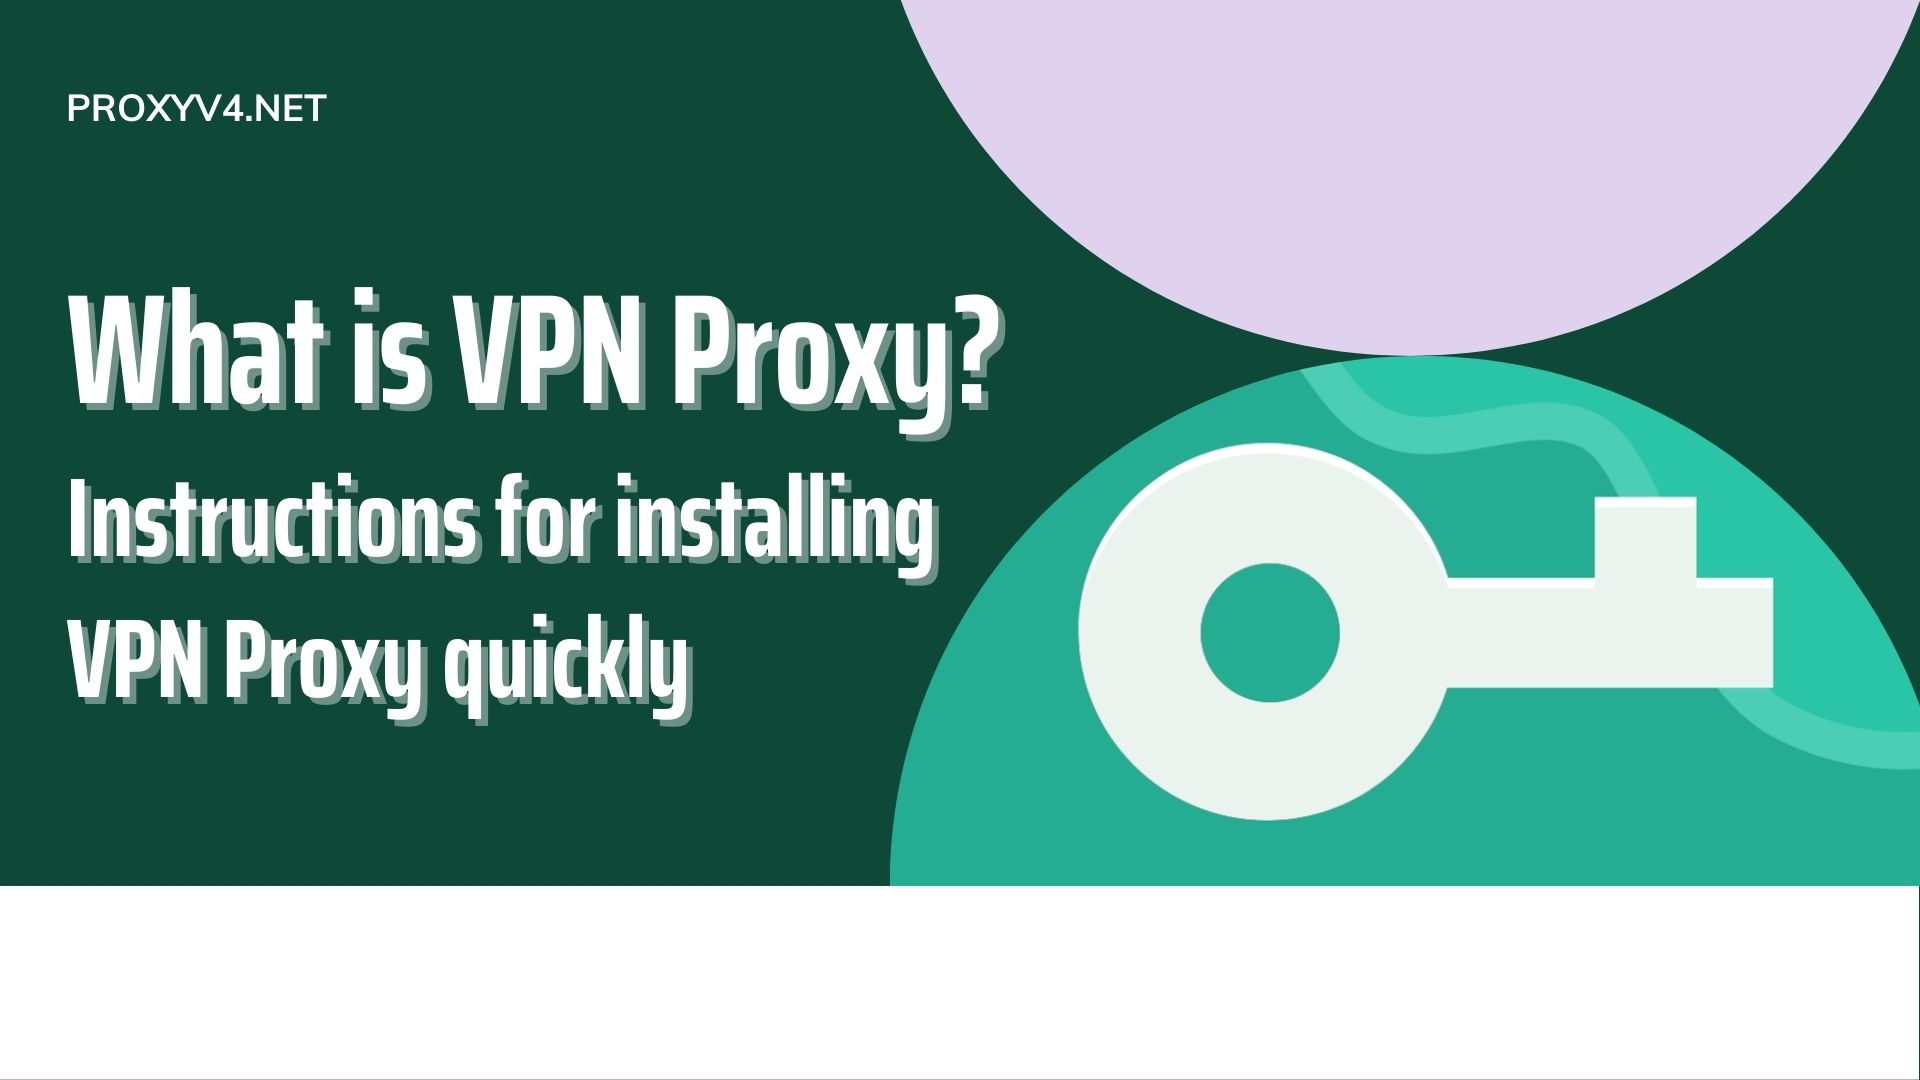 What is VPN Proxy? Instructions for installing VPN Proxy quickly